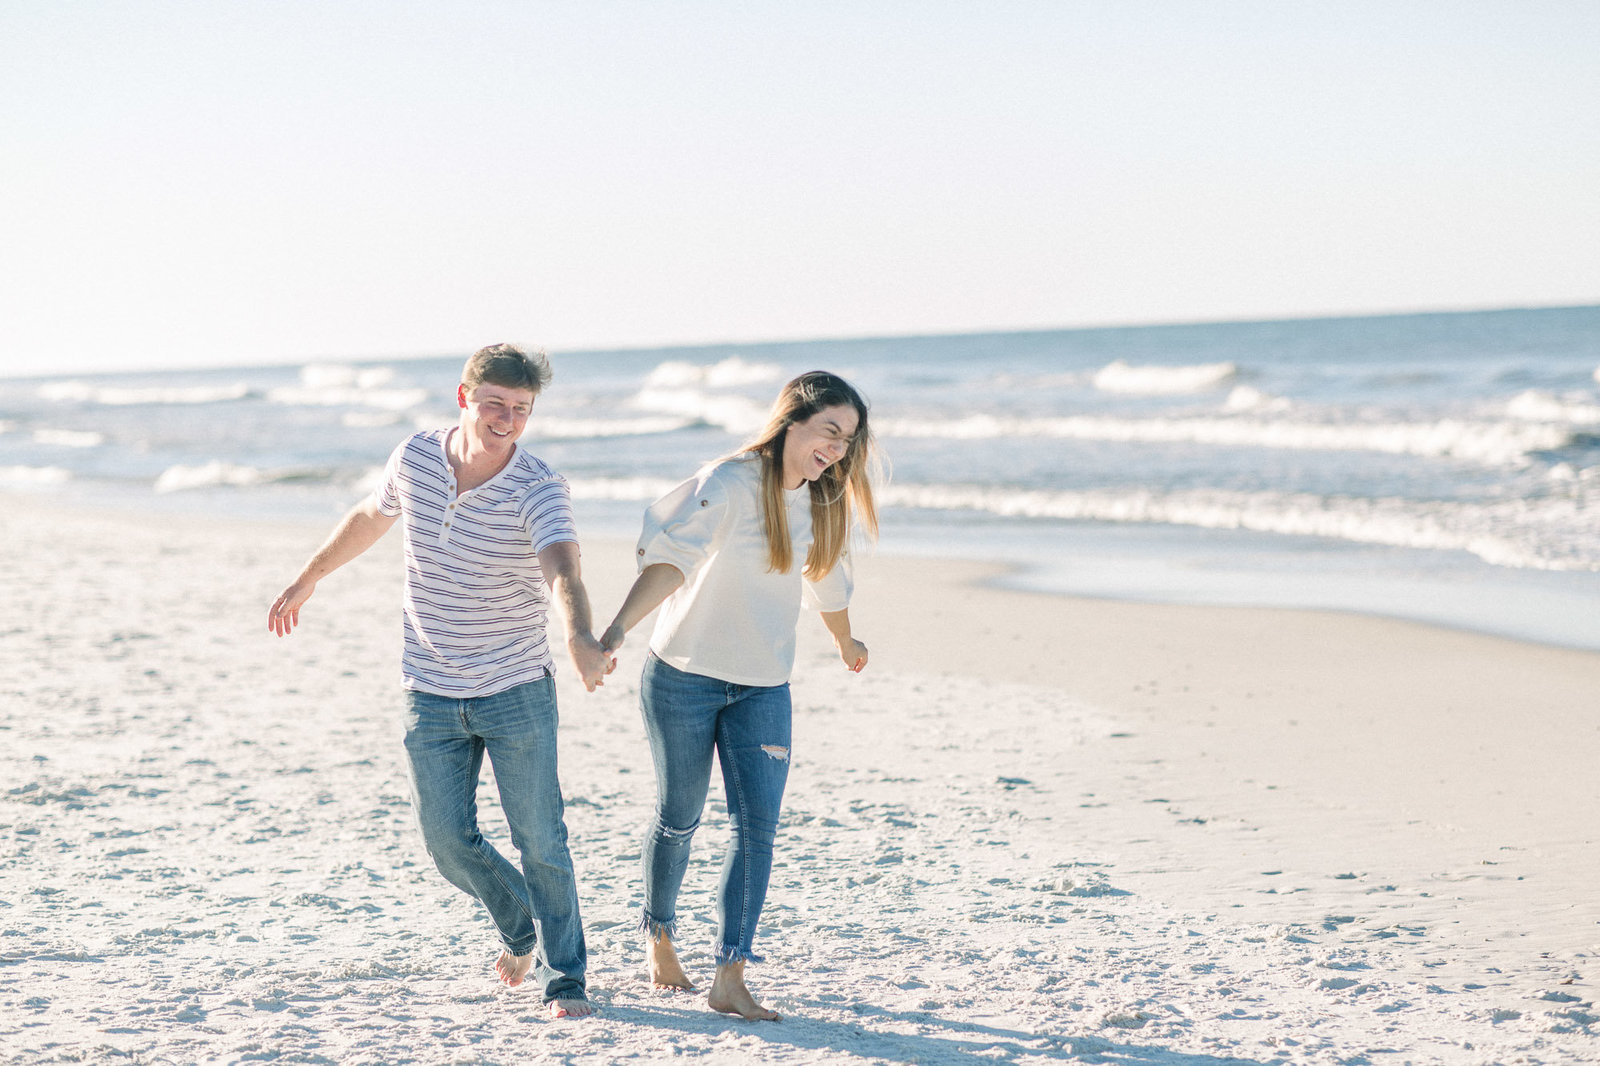 Laughing and running down the beach captured by Staci Addison Photography